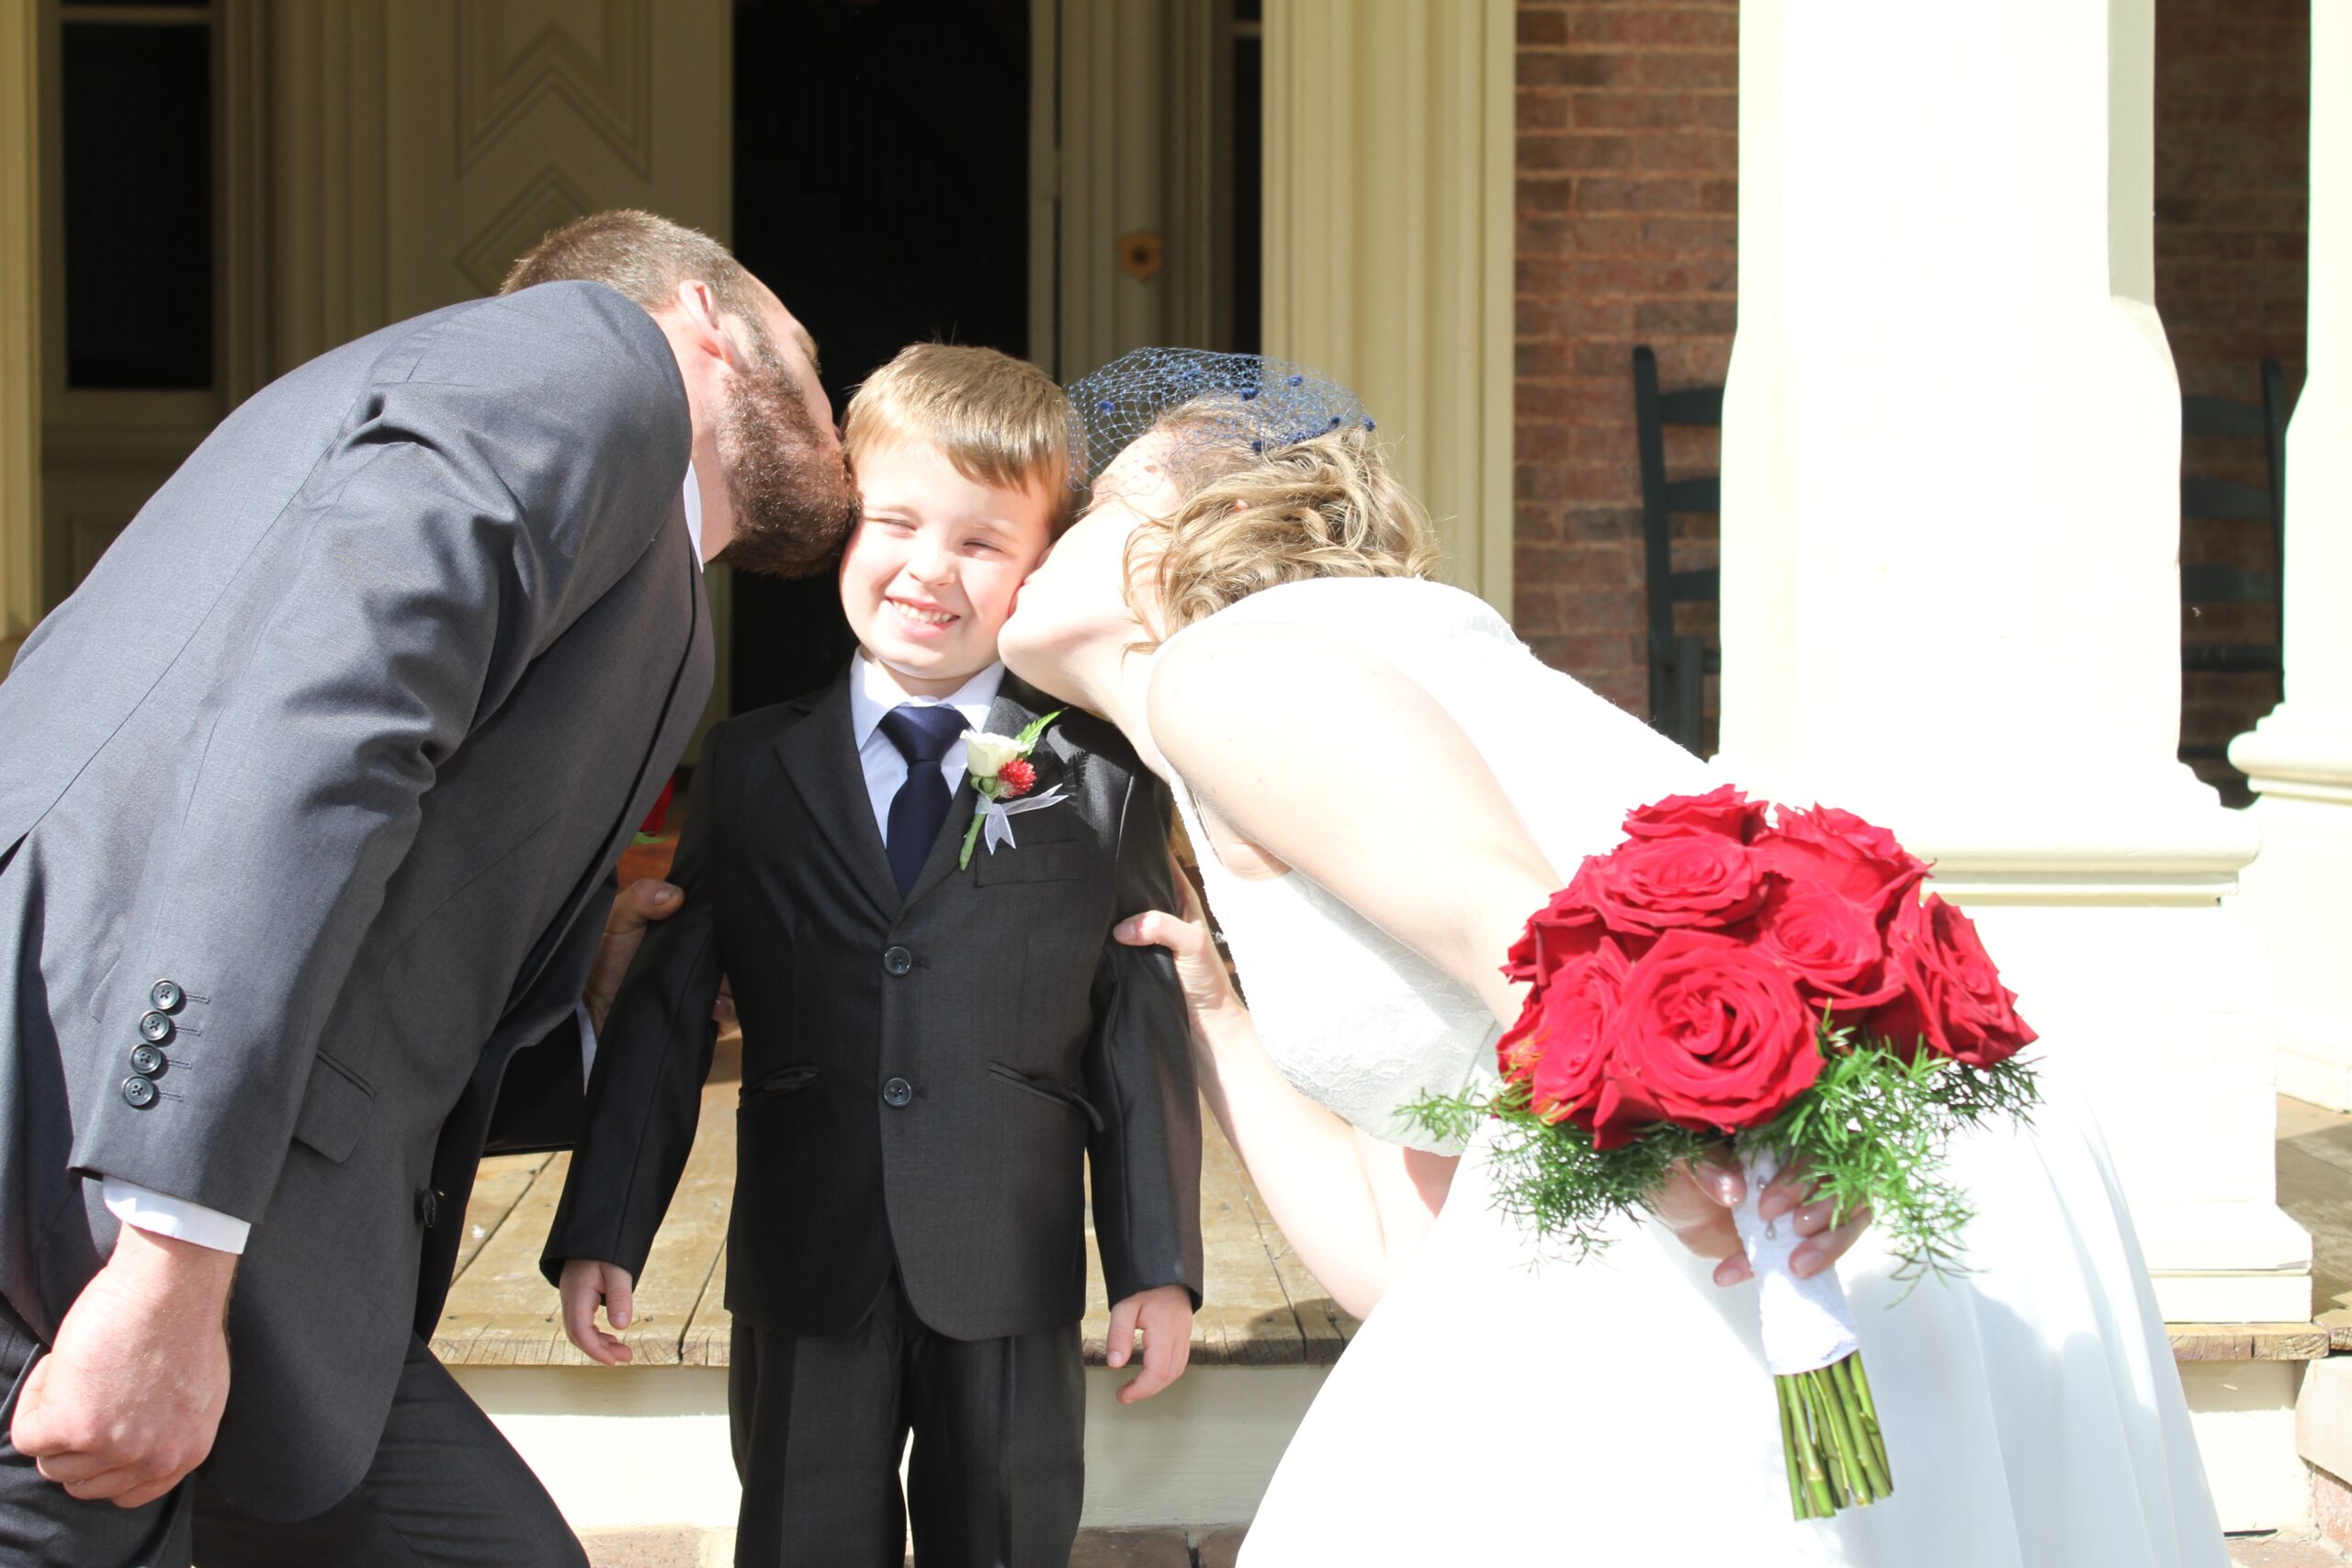 Groom, wearing a grey suit, blue tie and red rose boutonniere and the bride, wearing a white lace sundress and navy bird cage veil with navy ruffled heels, holding a large bouquet of red roses lean down to kiss their son on each cheek. The ring bearer is wearing a gray suit and navy tie smiles at the camera. The ring bearer has a small white rose boutonniere.